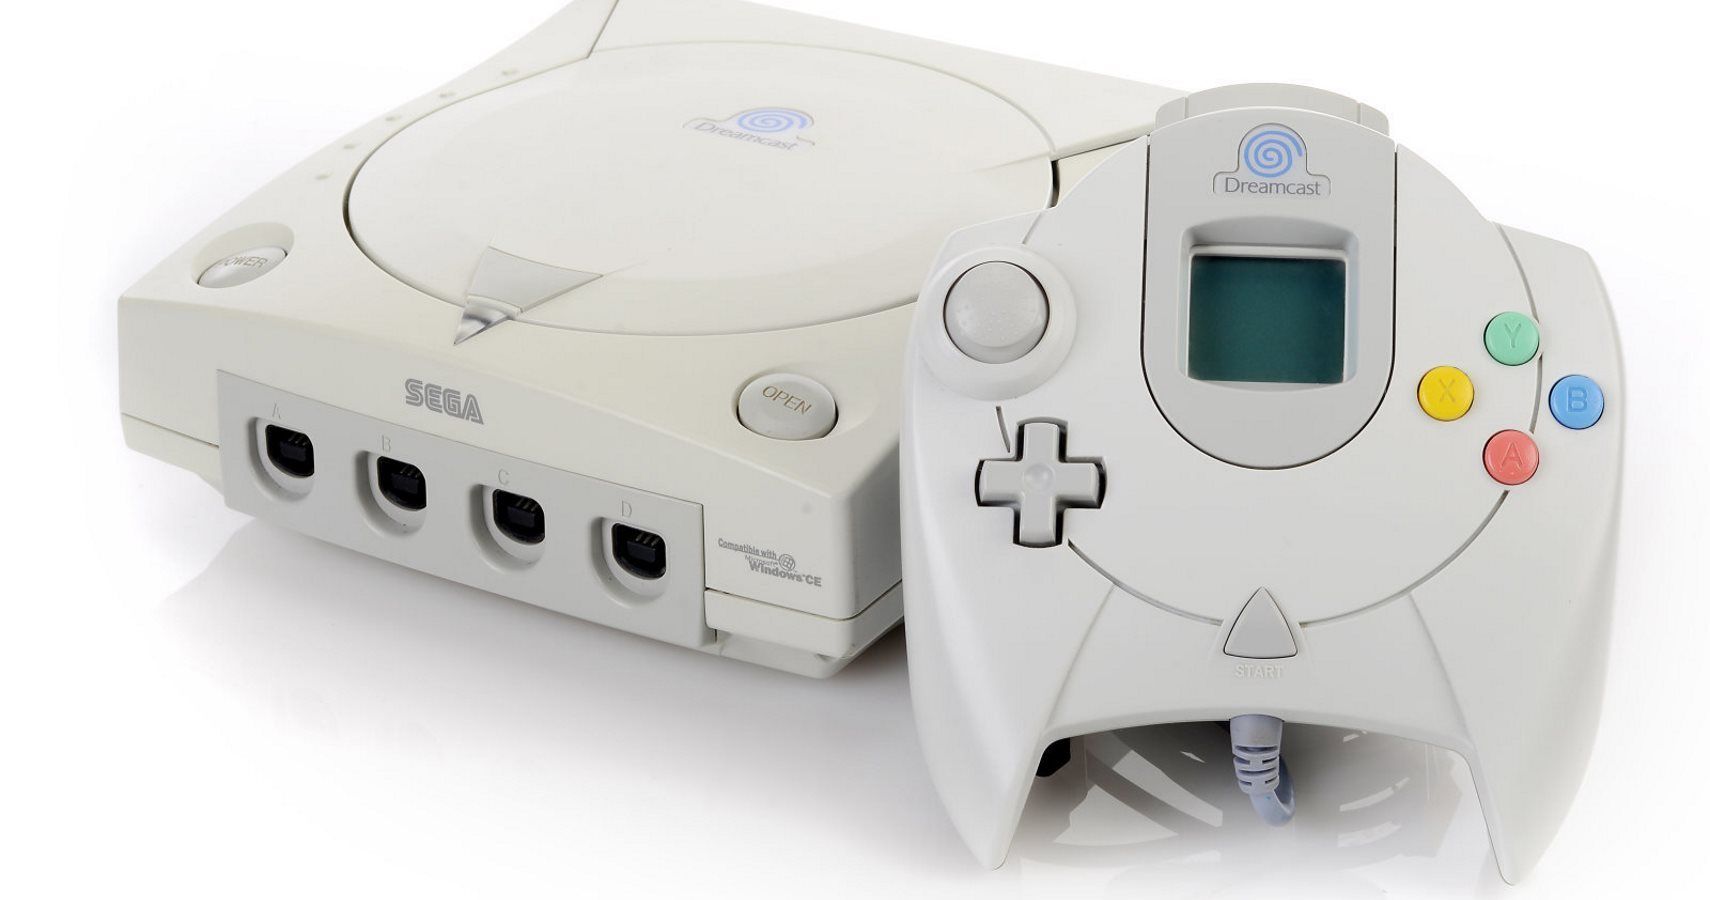 A Sega Dreamcast home video game console and controller, taken on July 7, 2014. (Photo by James Sheppard/Future Publishing via Getty Images)